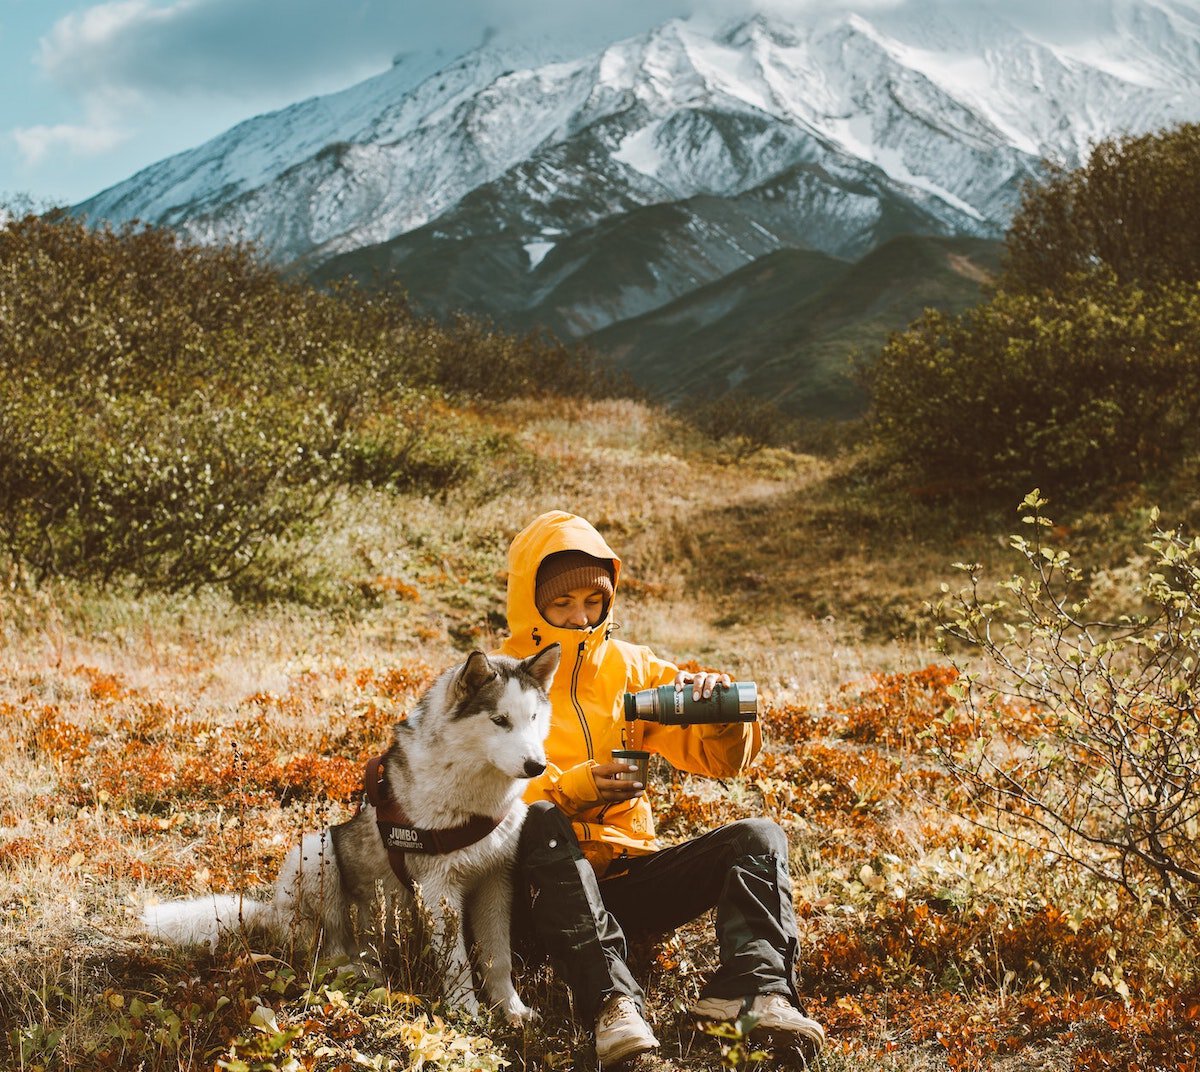 Owner & his dog enjoying a break in the mountains